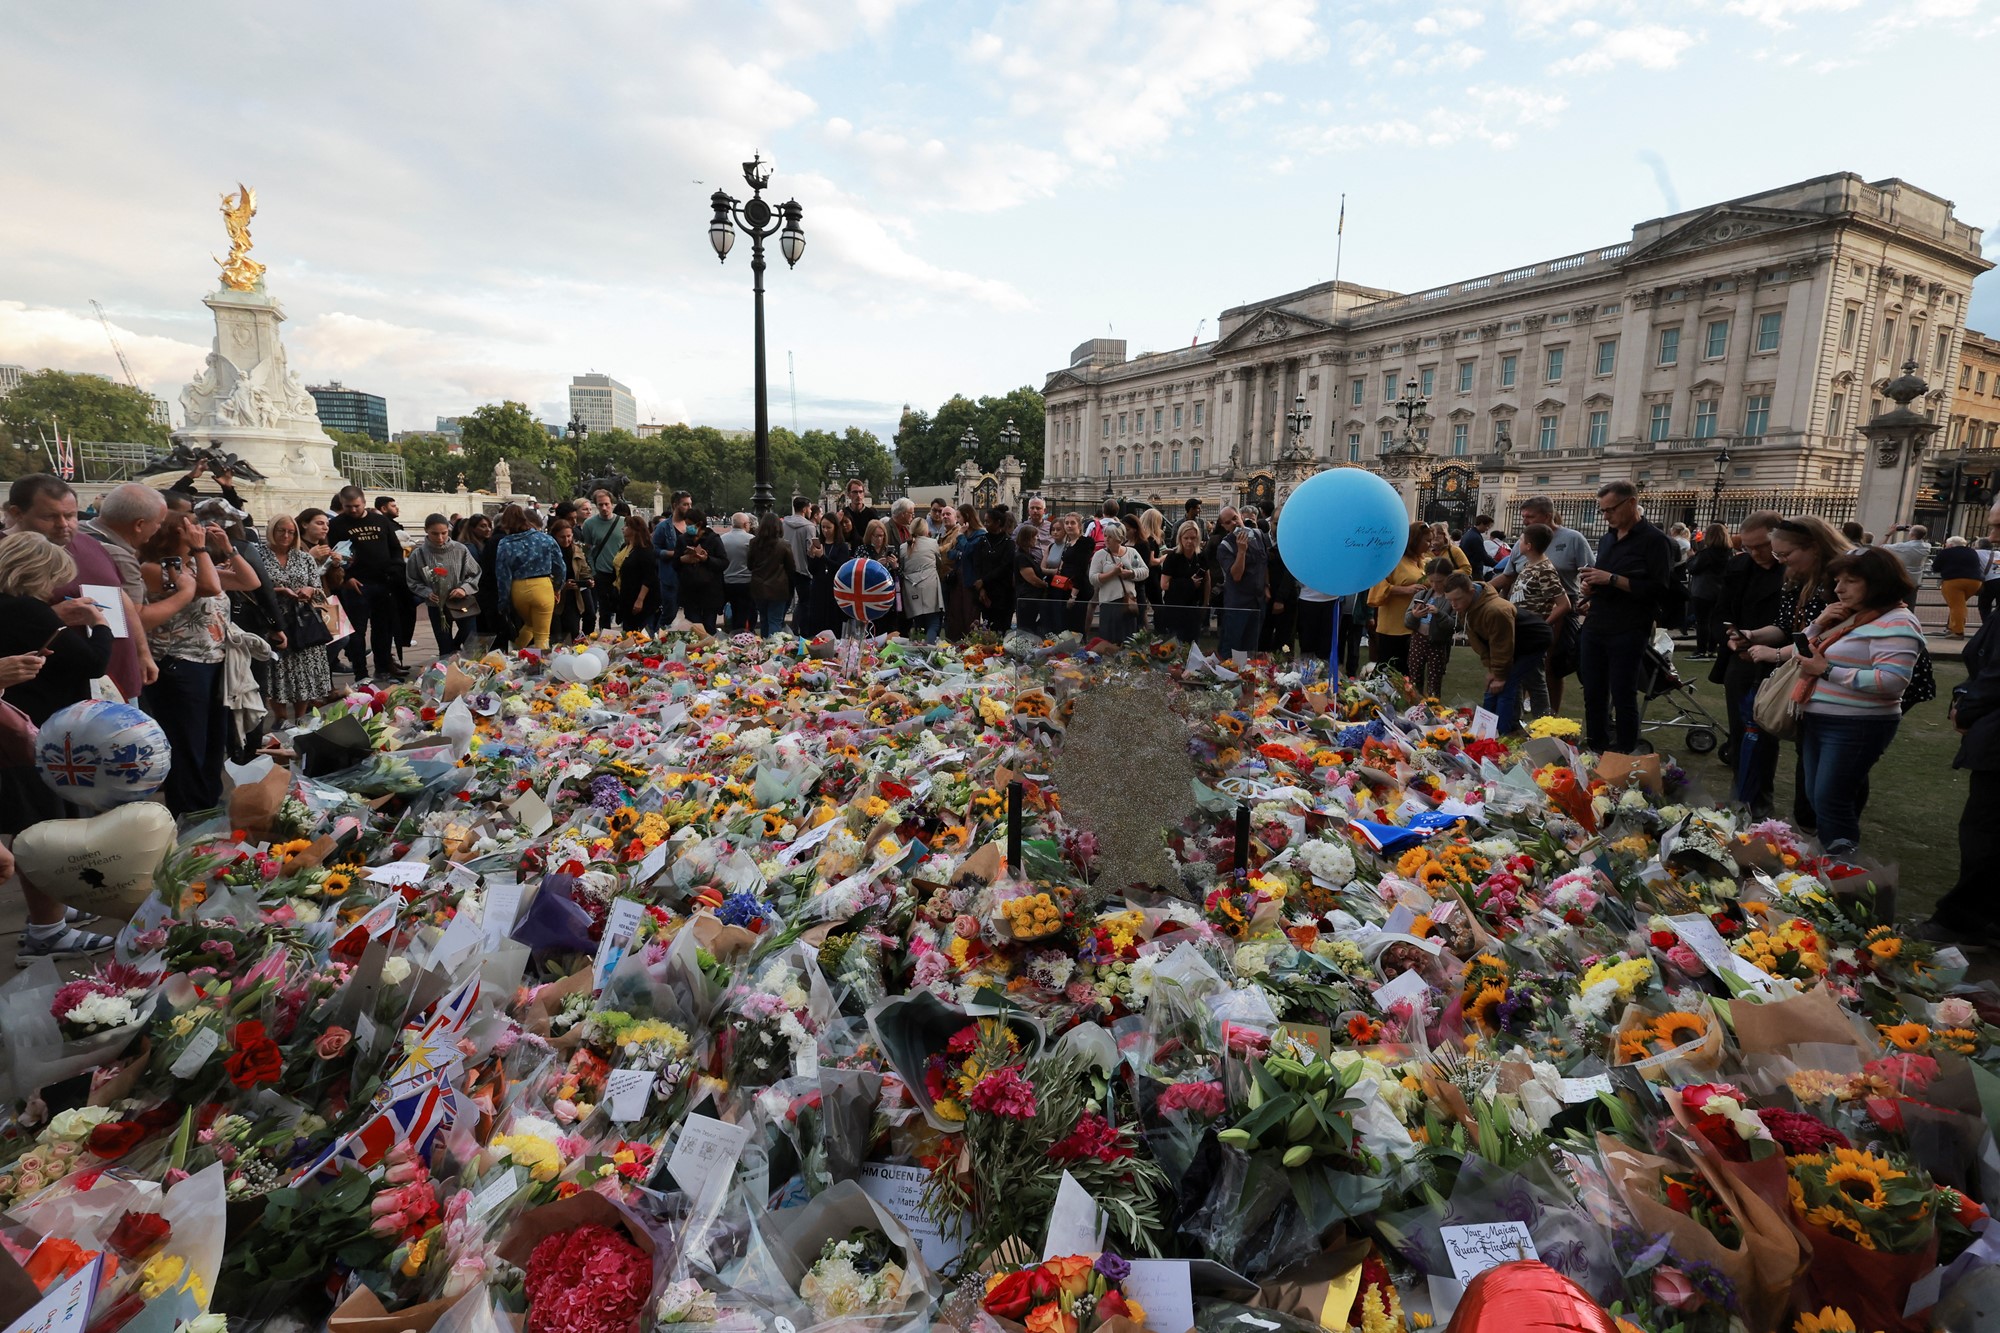 A sea of flowers and notes is pictured in front of Buckingham Palace, with people surrounding the floral tributes.